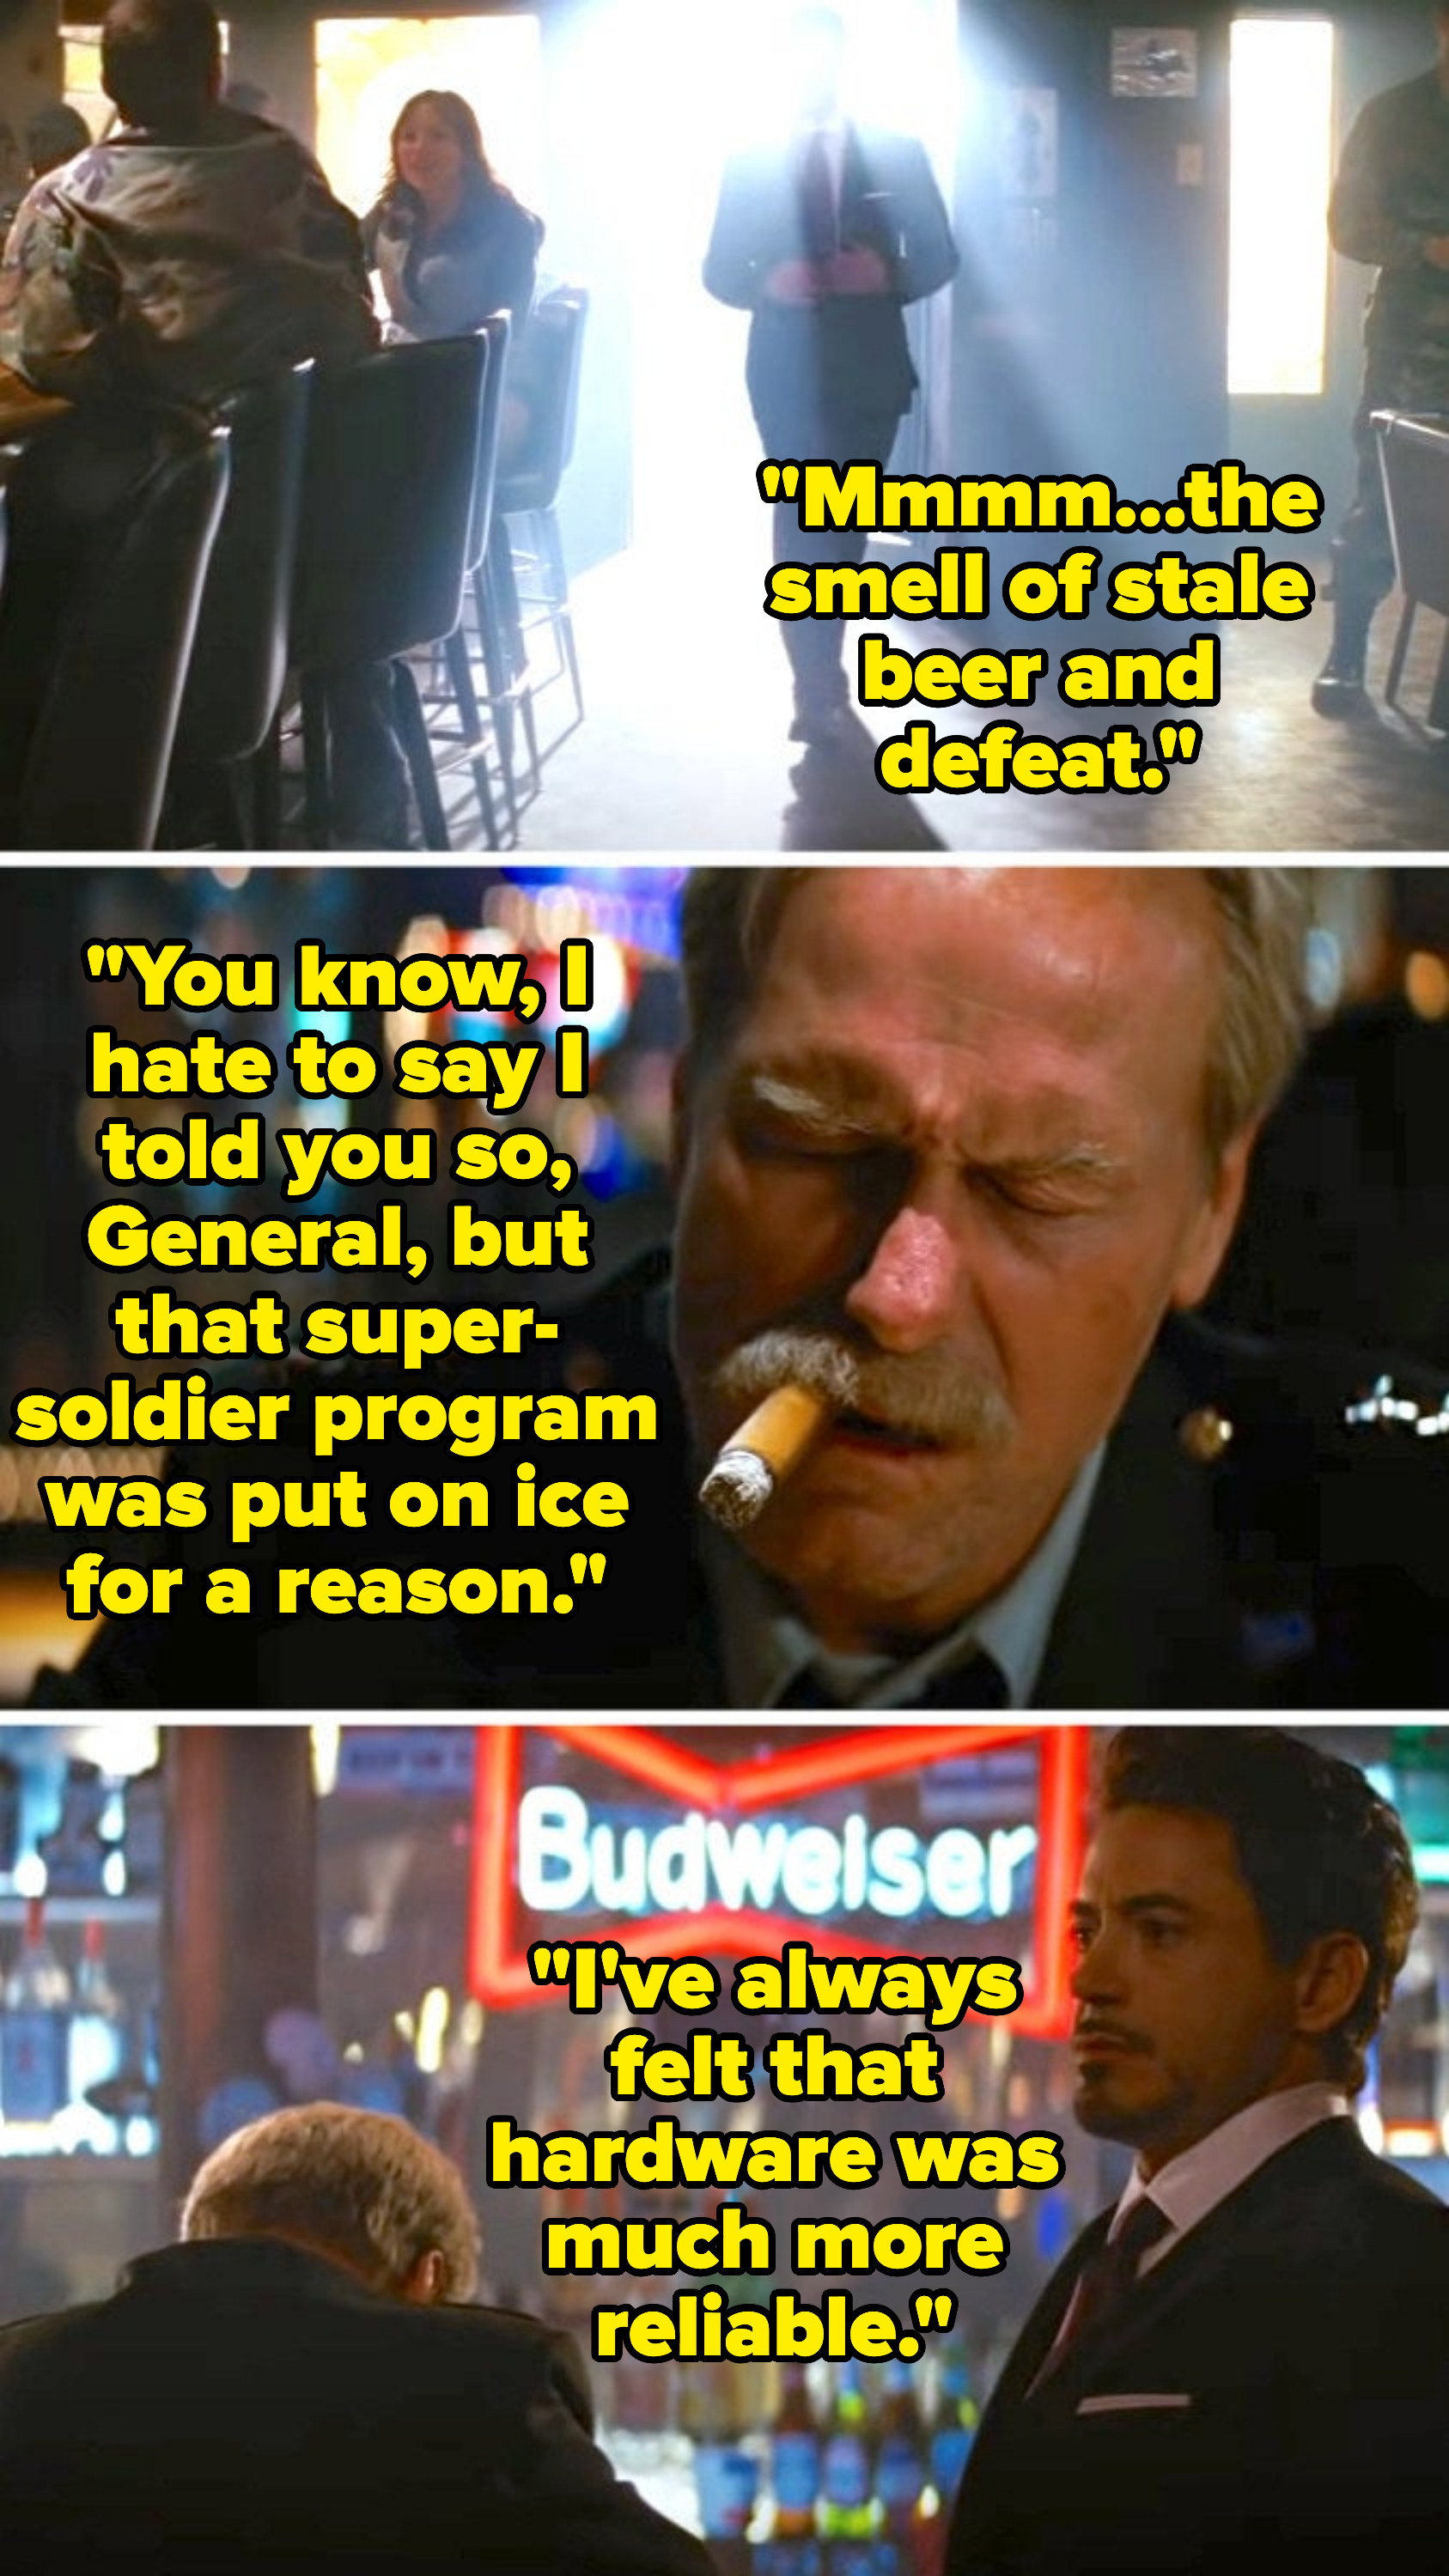 Tony enters the bar where Ross is and says that the super-soldier program was put on ice for a reason, and that he thinks hardware is more reliable